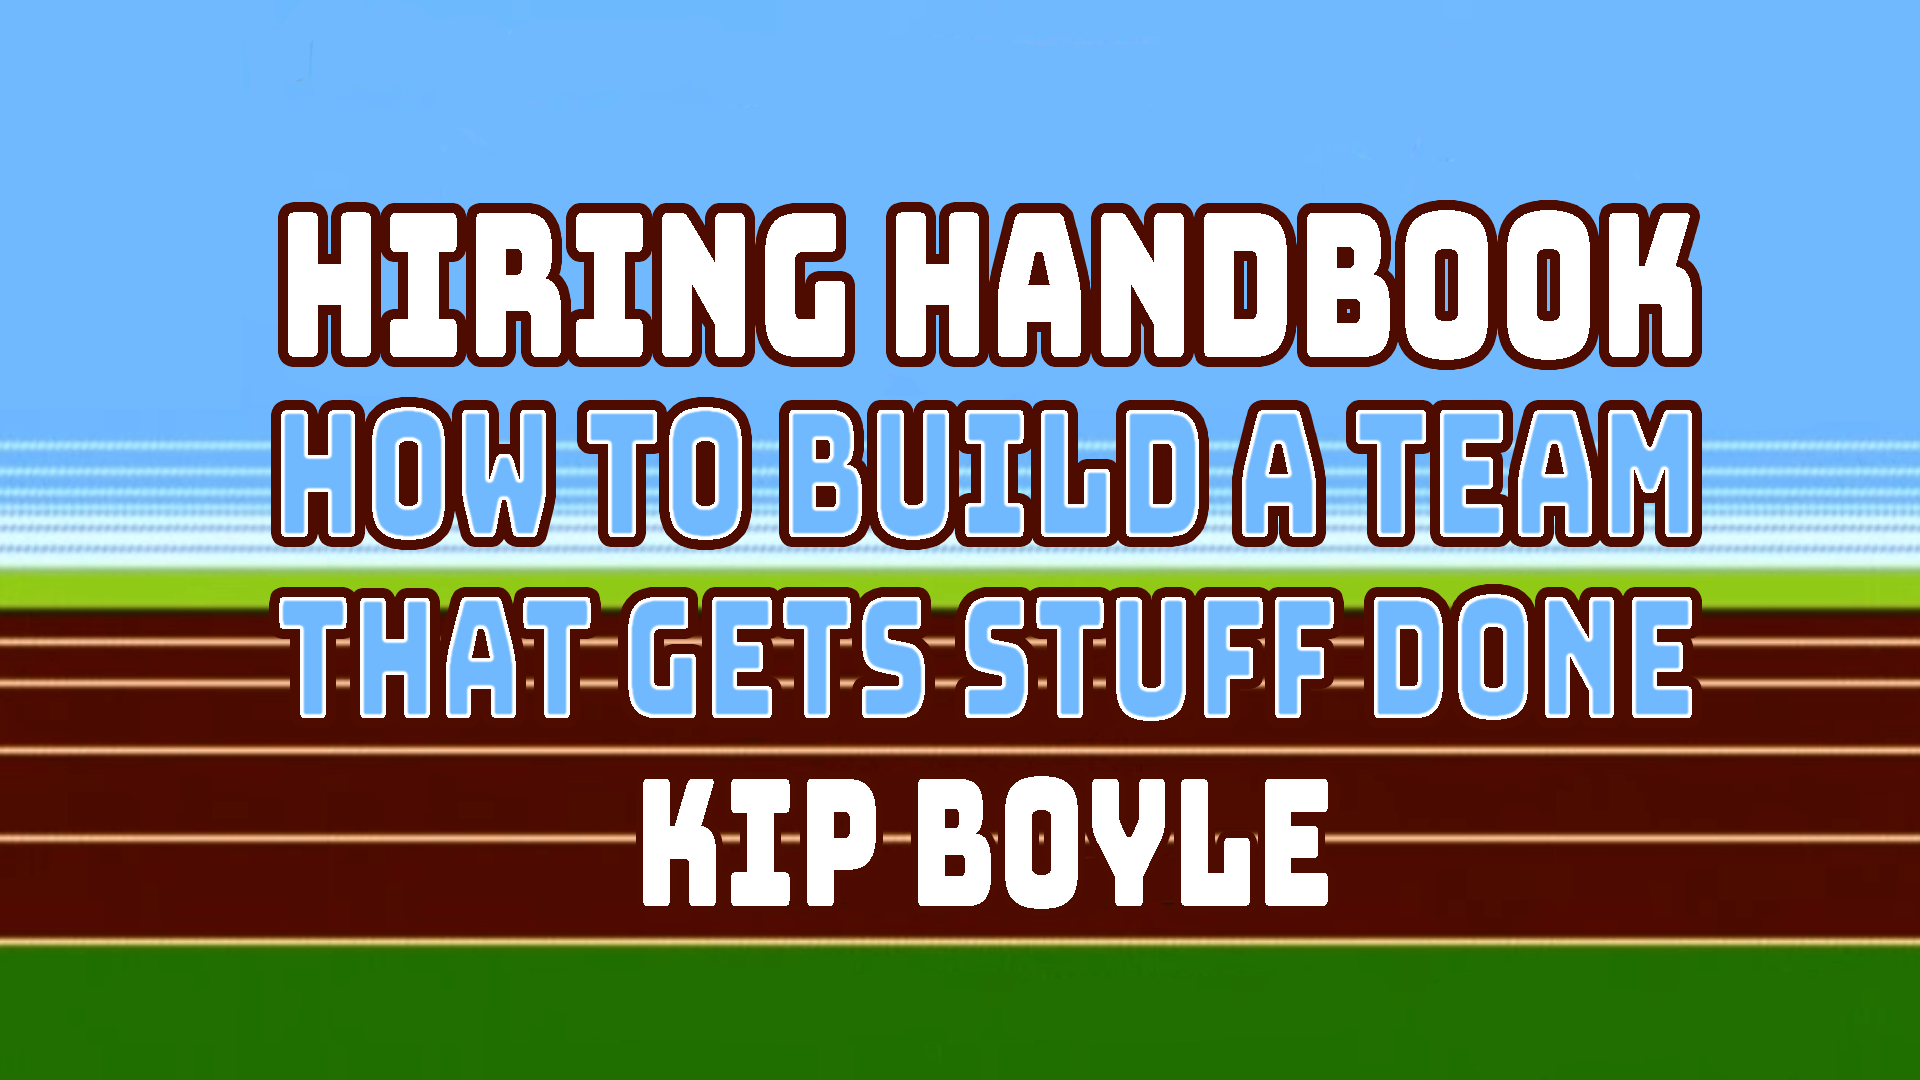 Hiring Handbook - How to Build a Team that Gets Stuff Done, with Kip Boyle